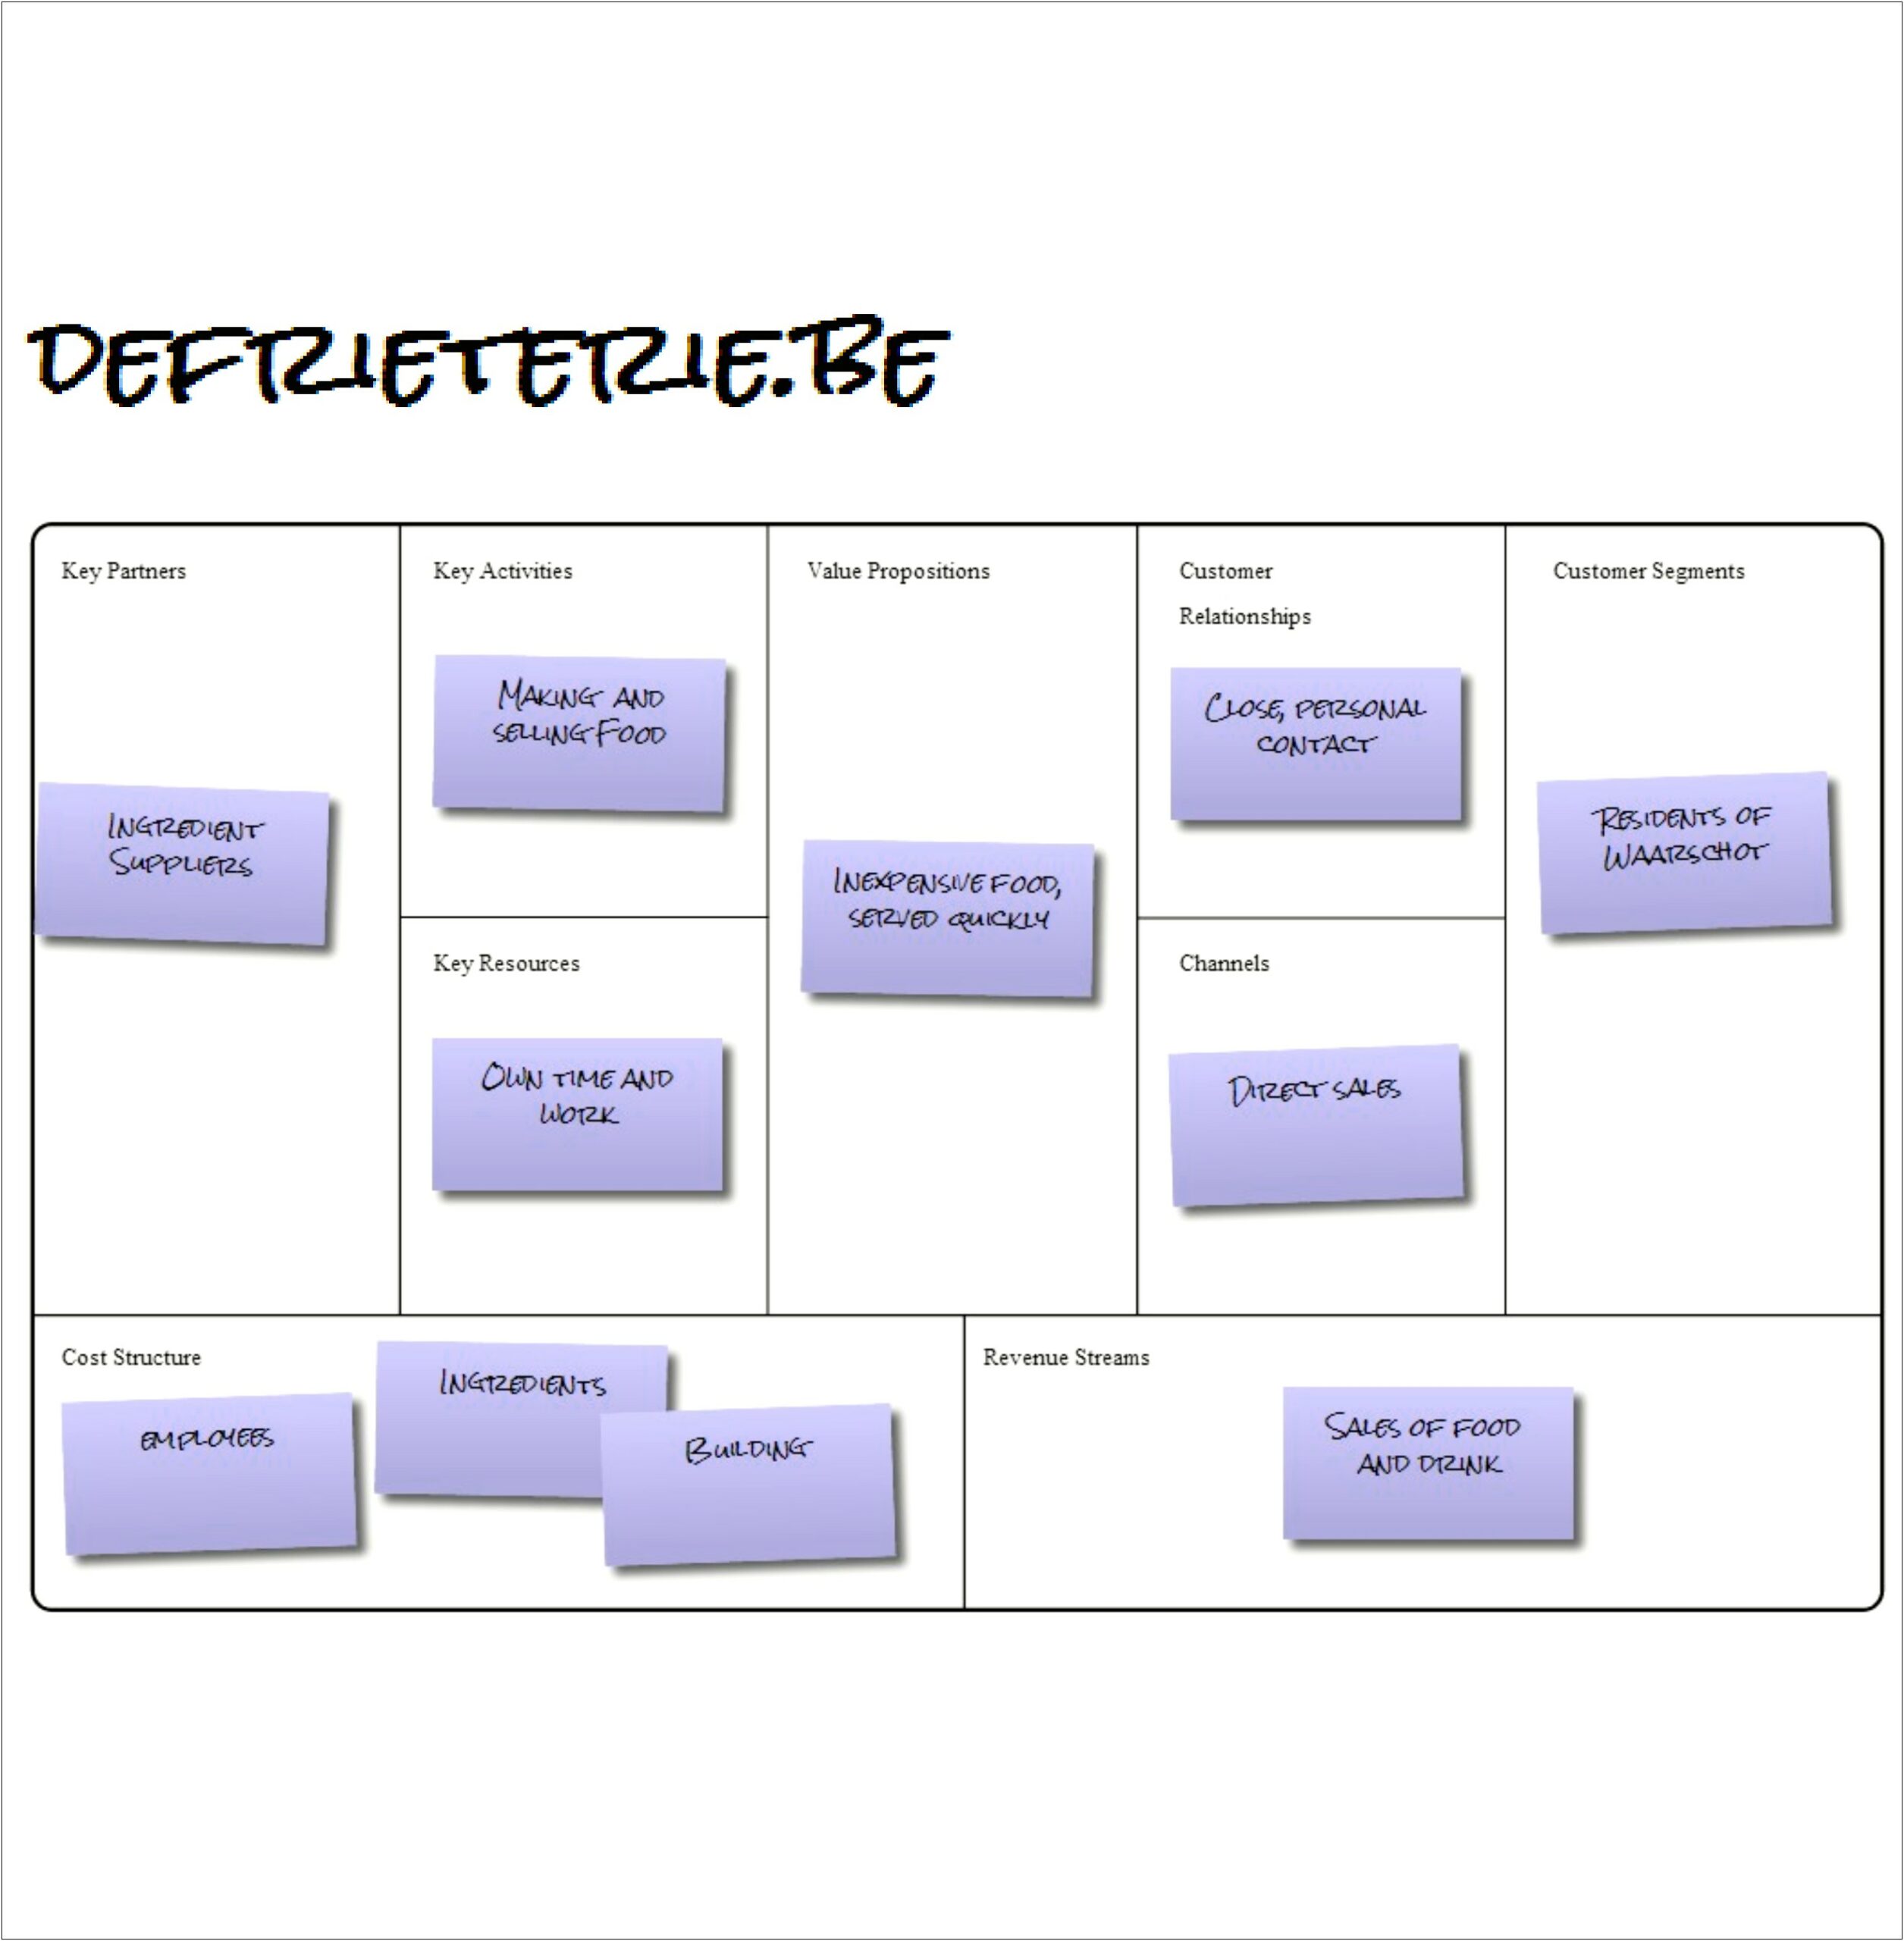 Business Model Canvas Template Ppt Free Download